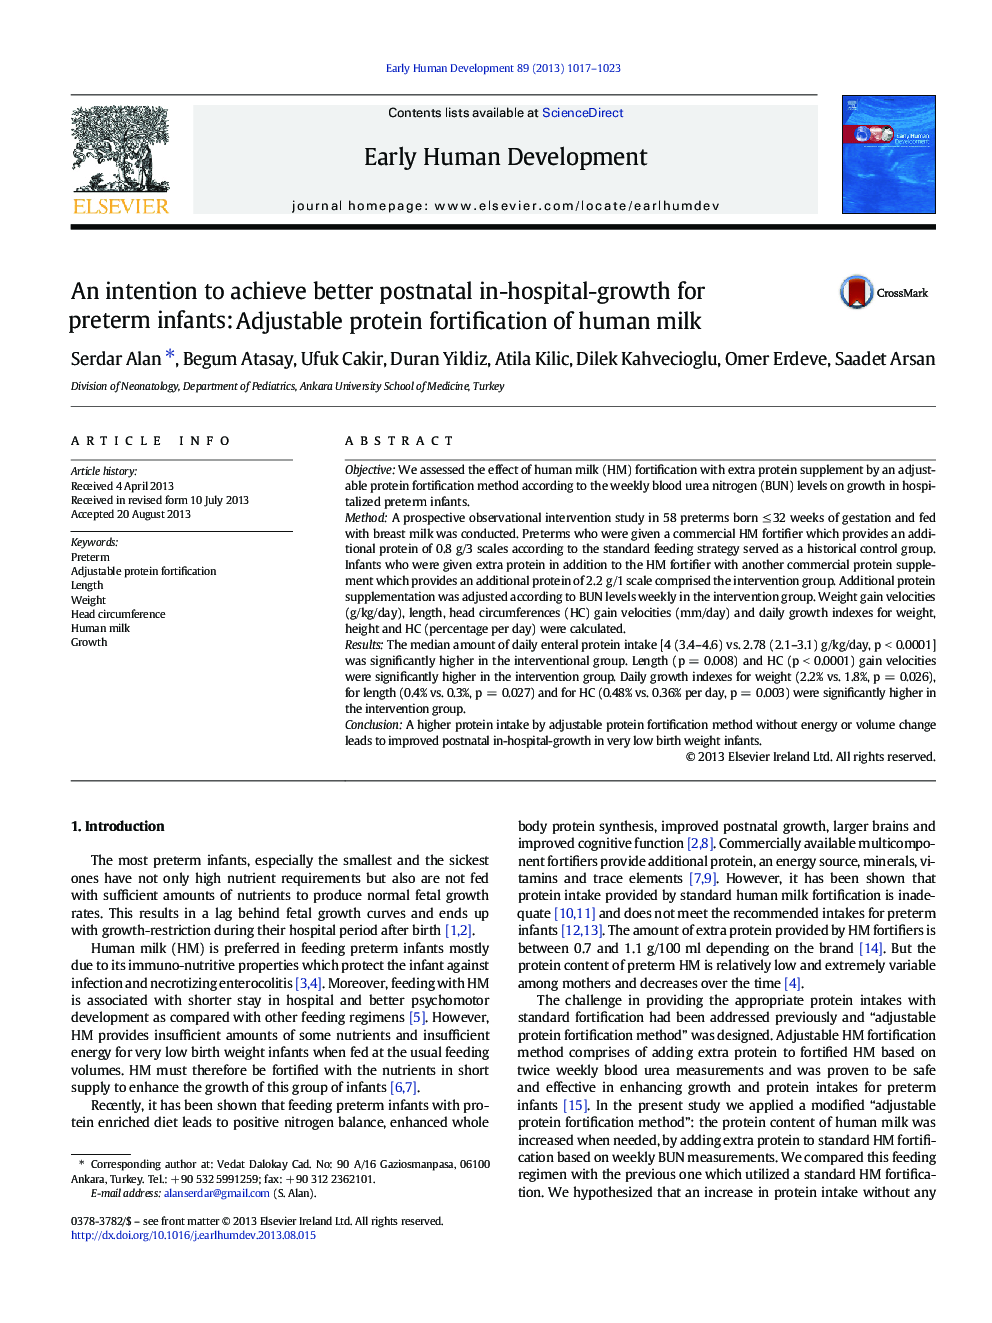 An intention to achieve better postnatal in-hospital-growth for preterm infants: Adjustable protein fortification of human milk